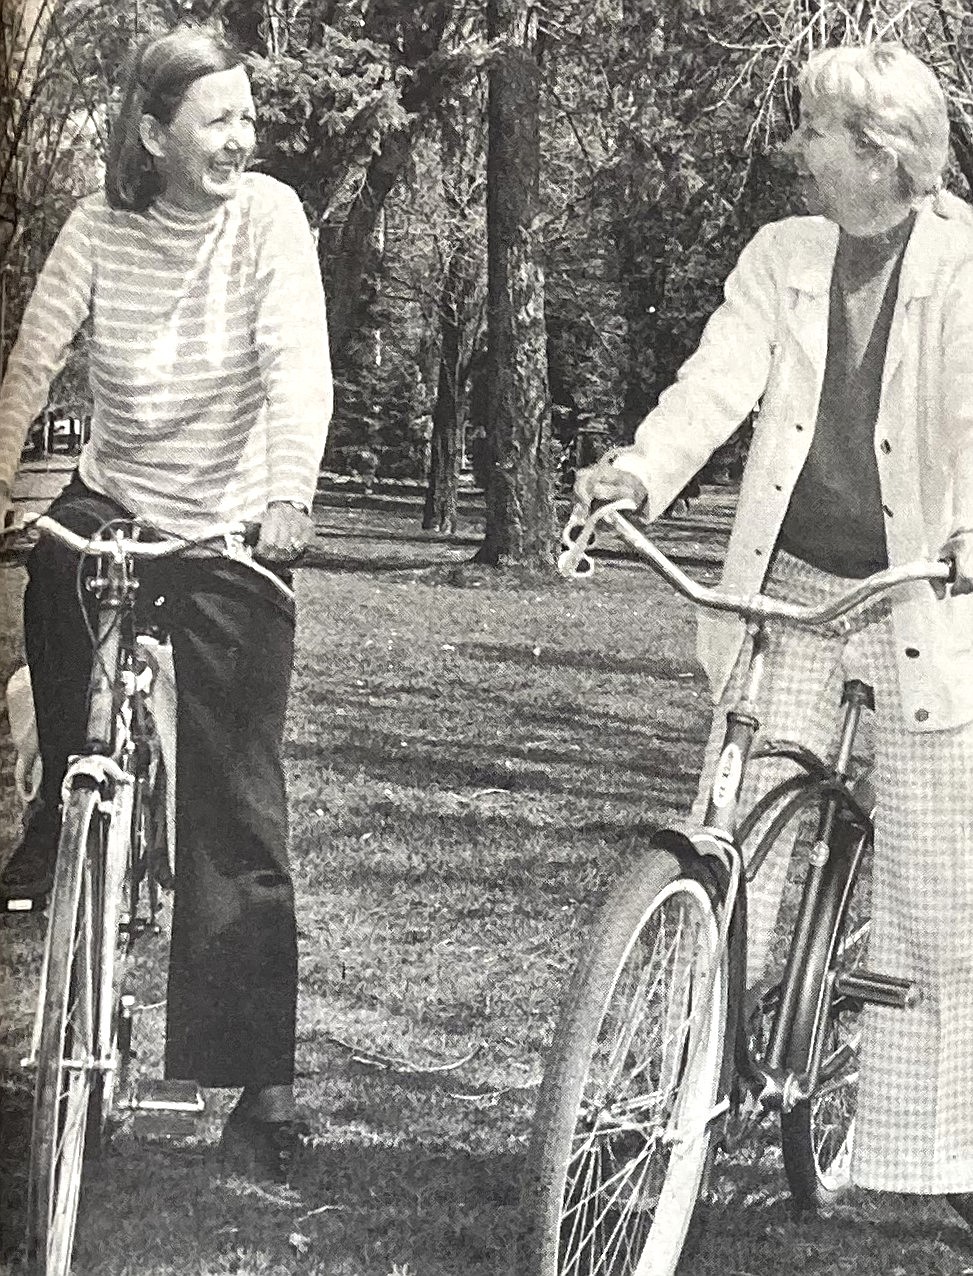 Mary Lou Reed, left, and Donna Young on their faddish bikes.